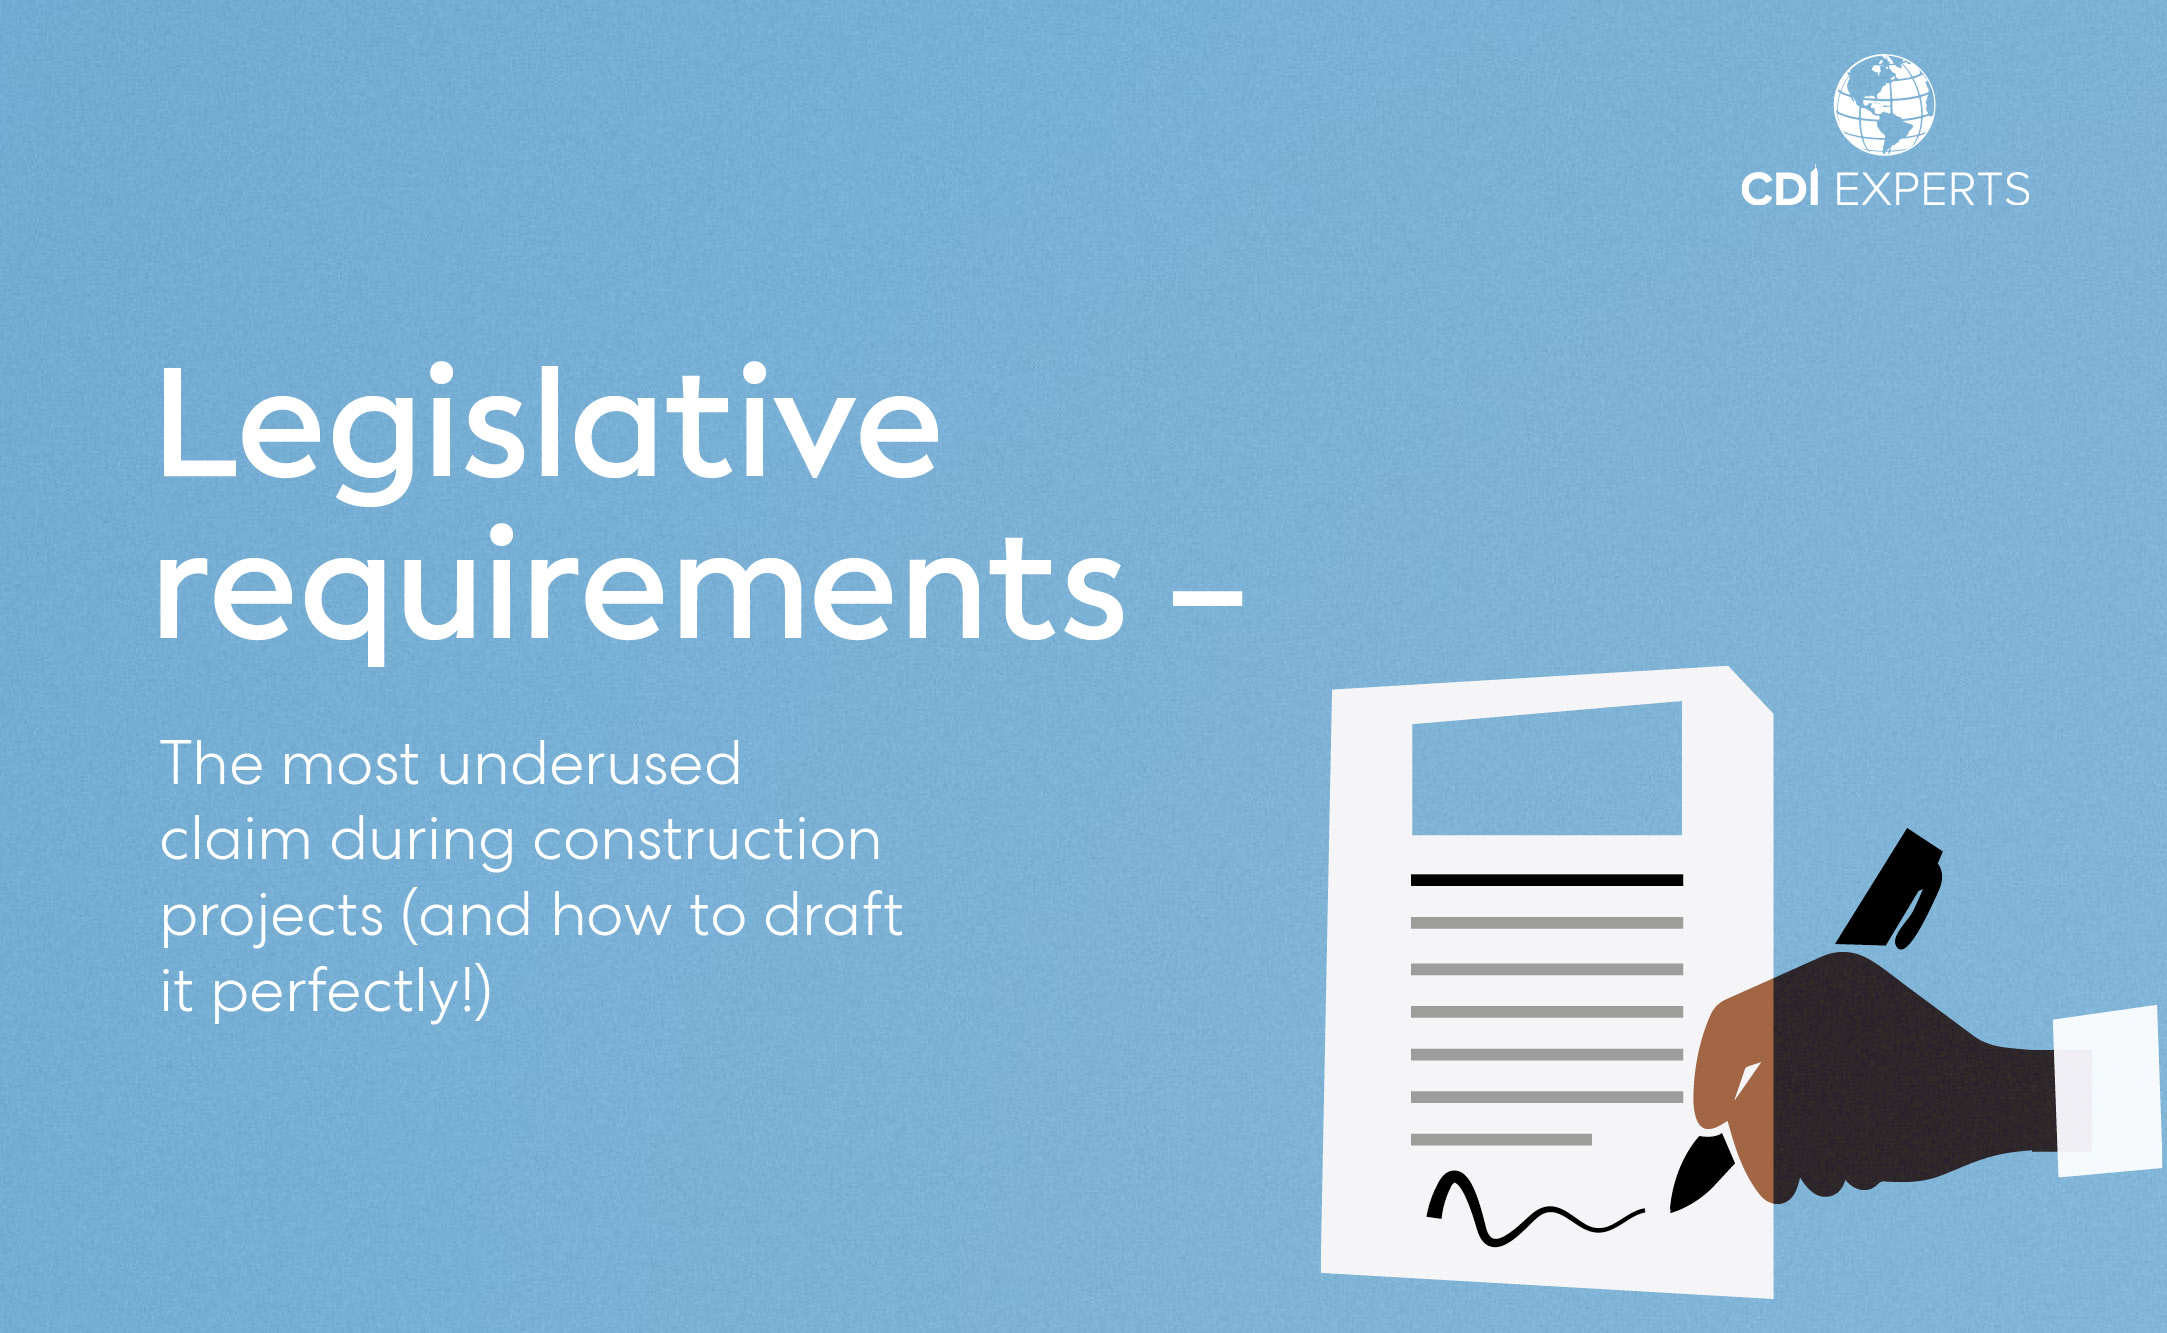 Legislative requirements – The most underused claim during construction projects (and how to draft it perfectly!)